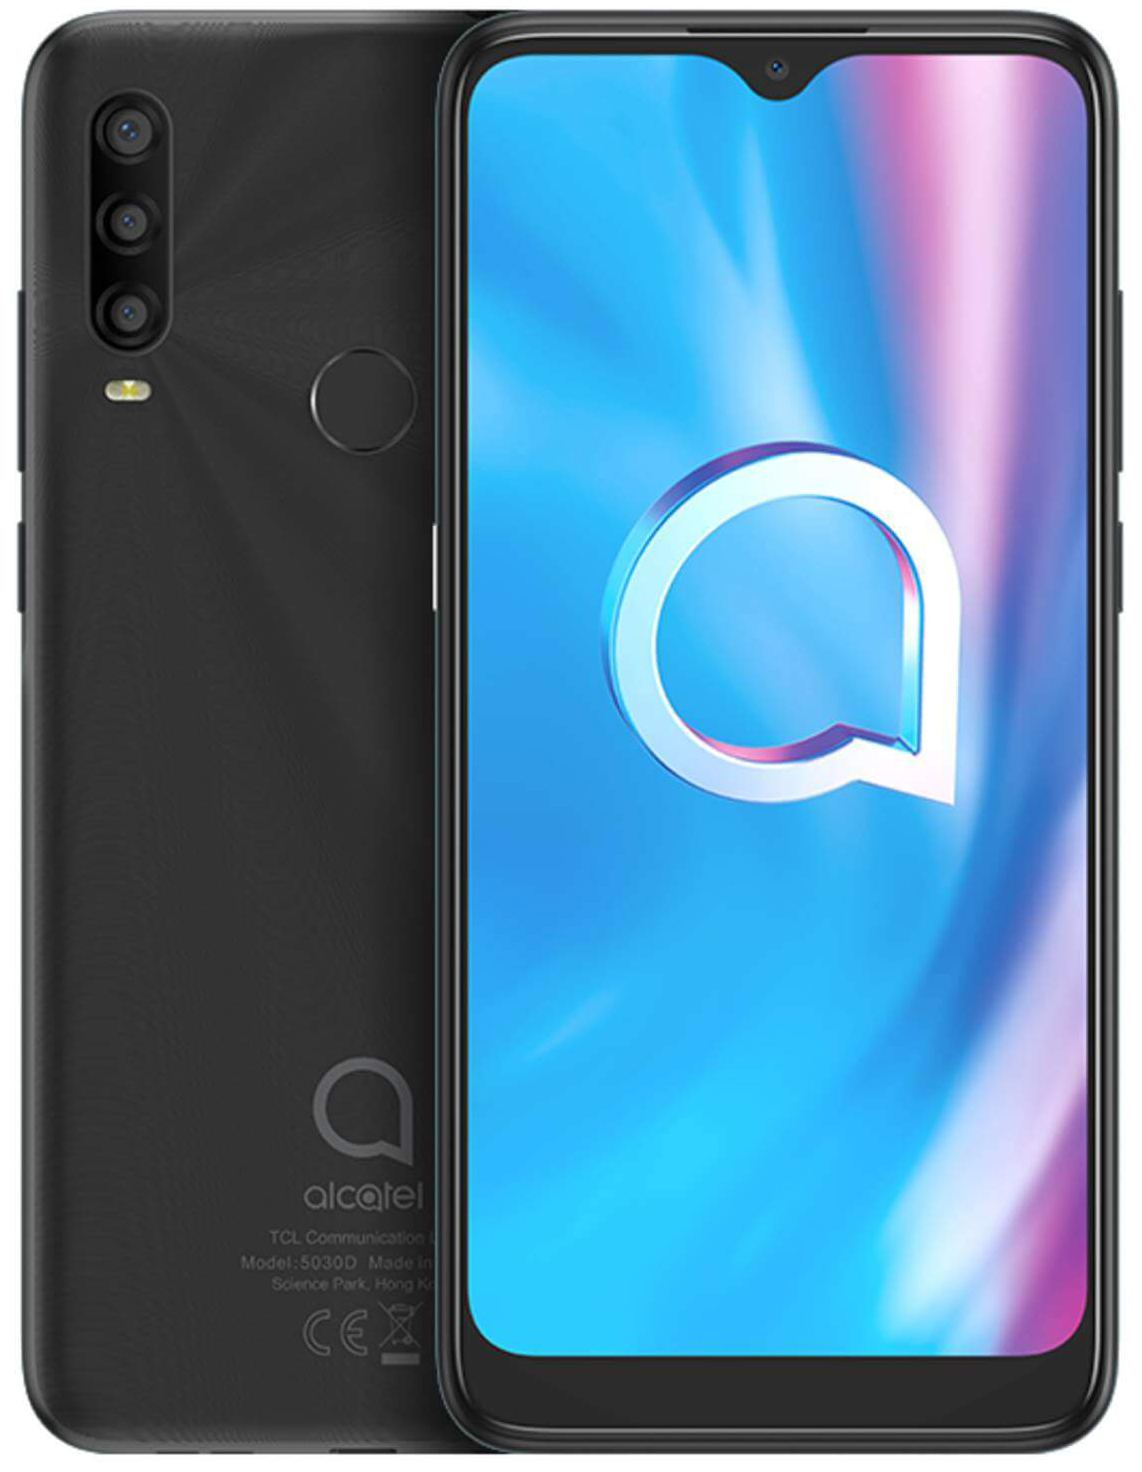 Alcatel's new 5, 3, and 1 smartphone series get 18:9 displays and ...